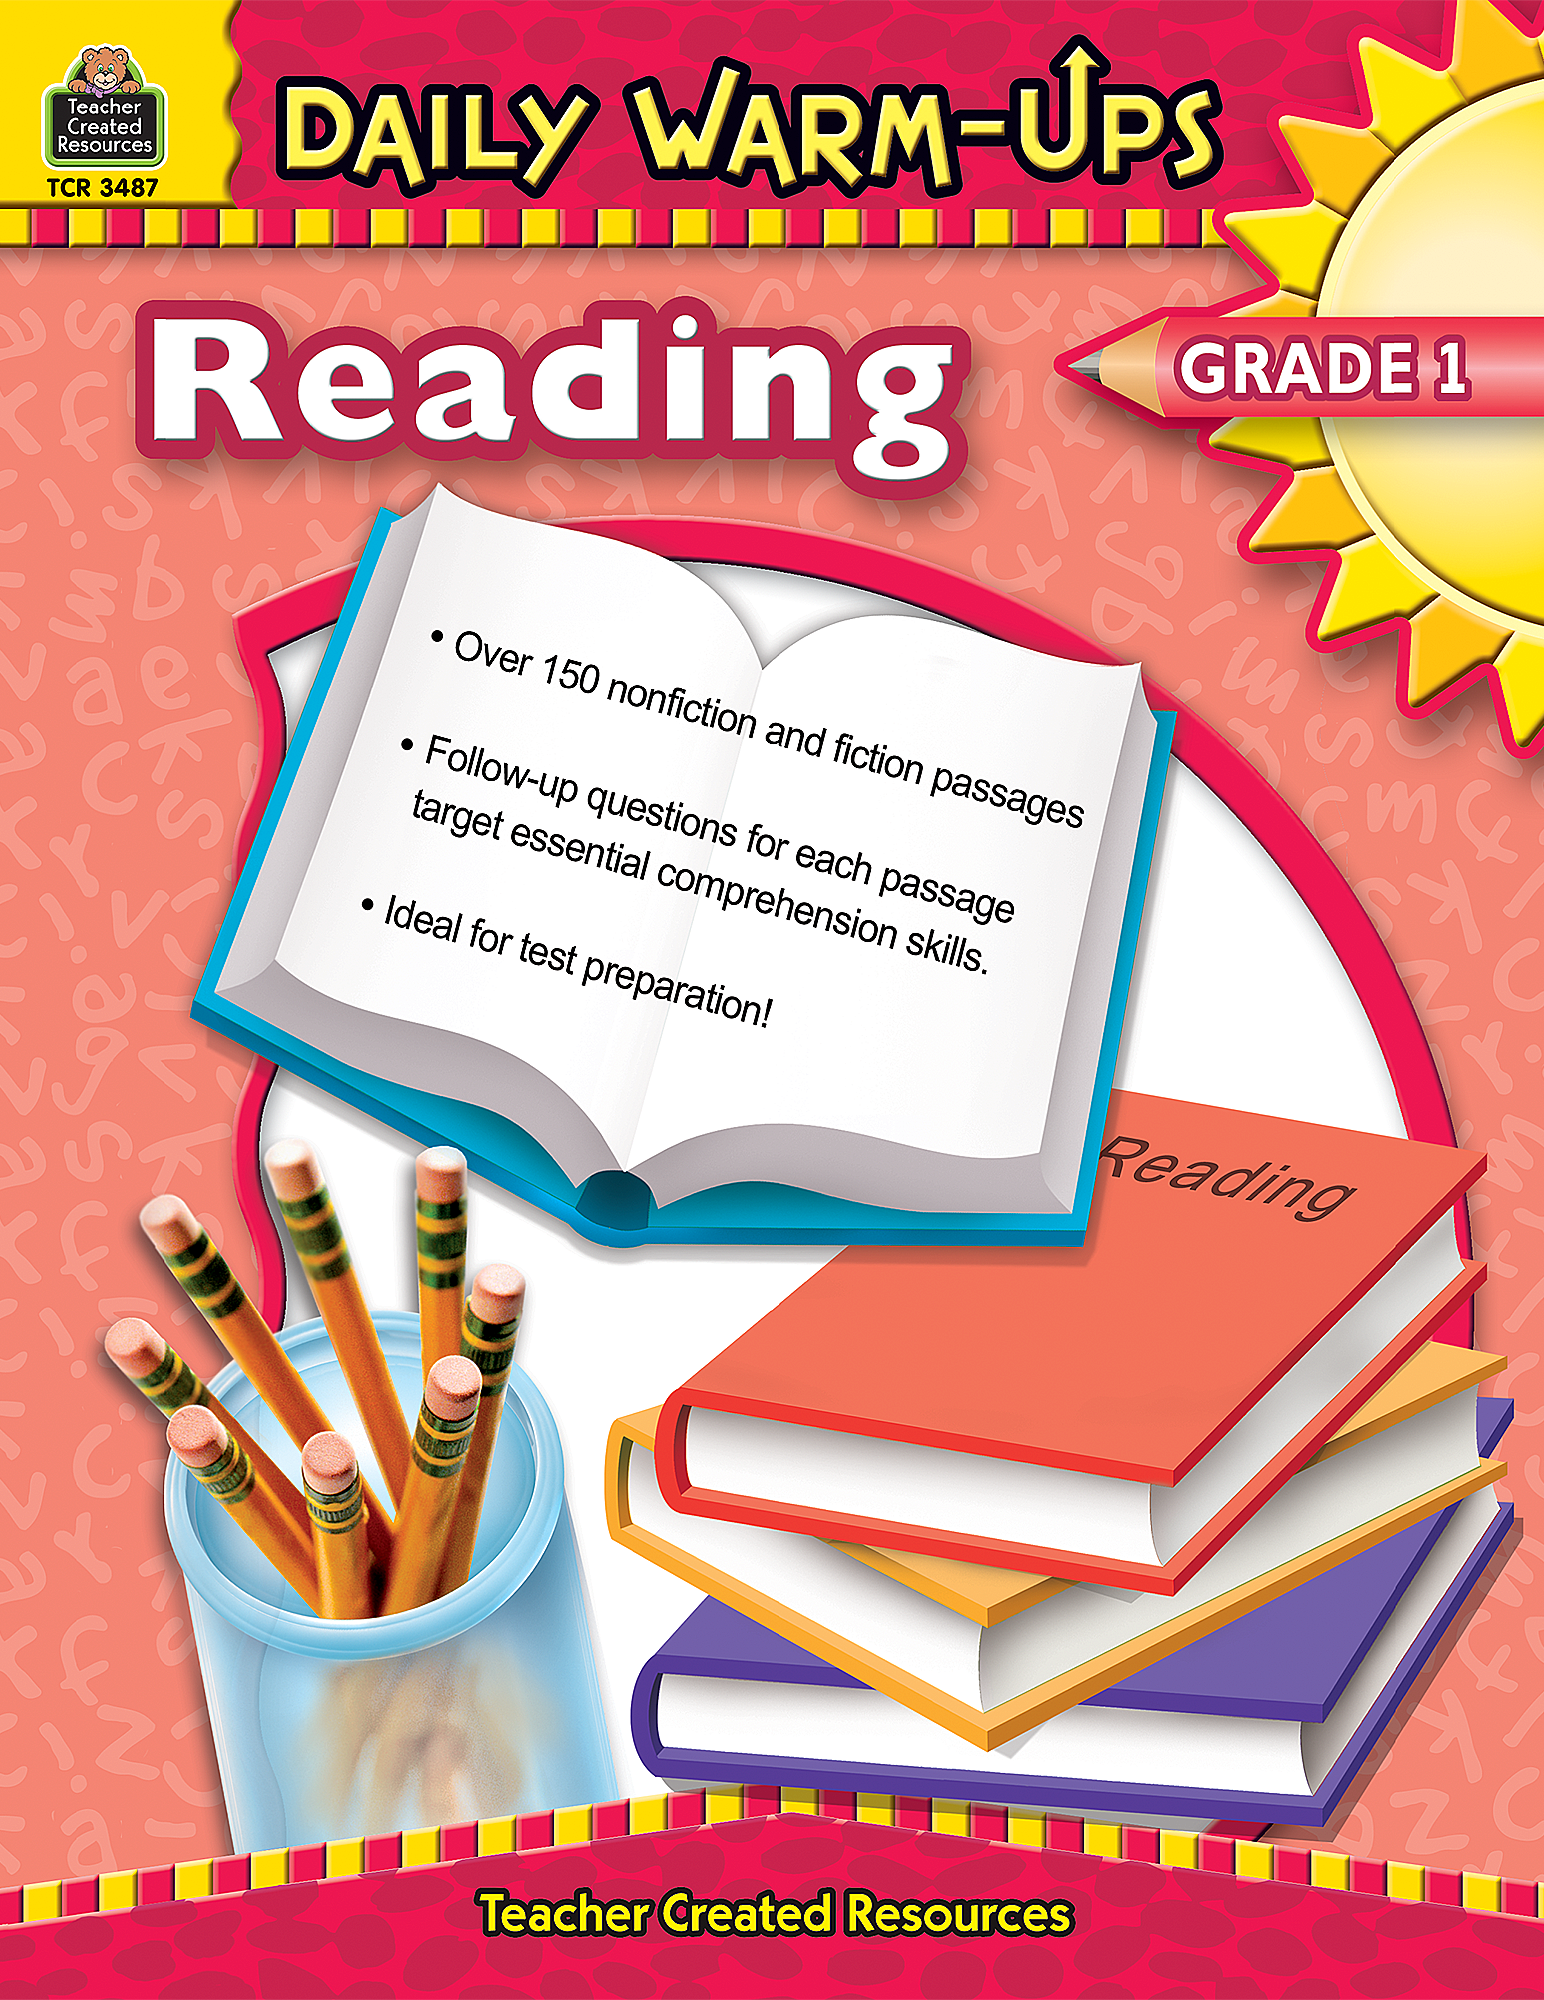 how to improve comprehension skills in reading